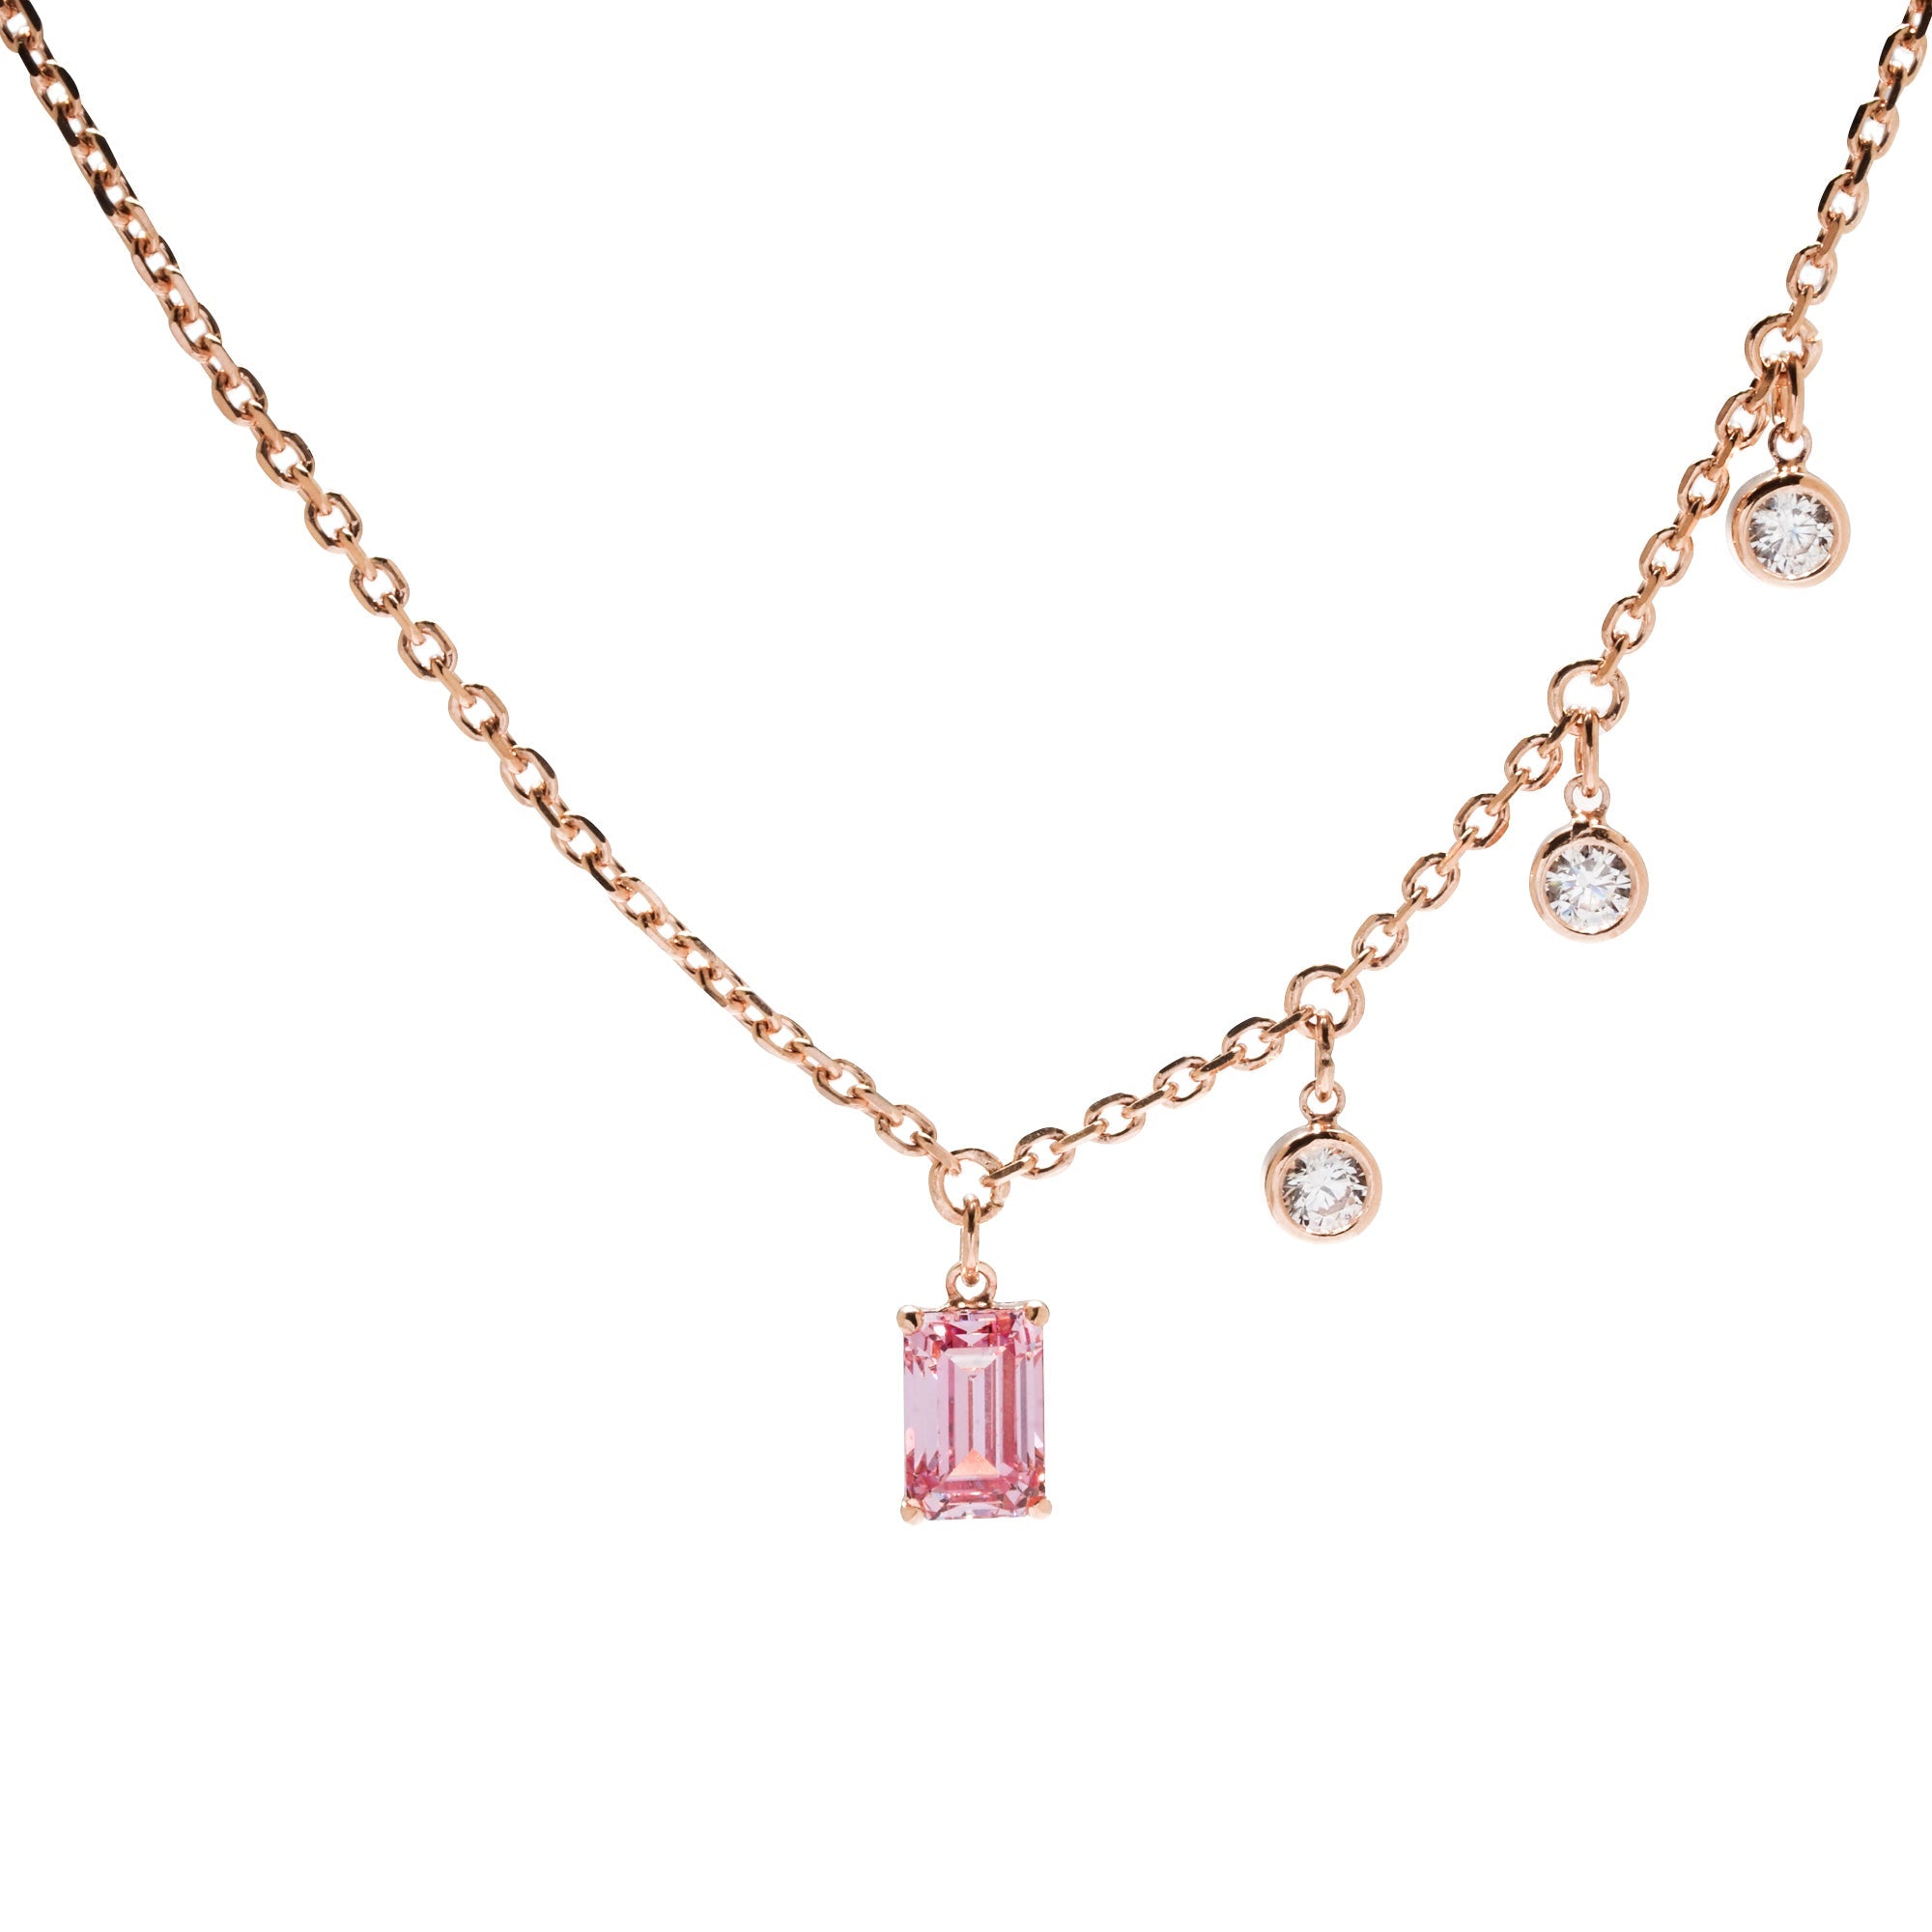 Candy Gold Necklace - Rosy Pink - Juene Jewelry